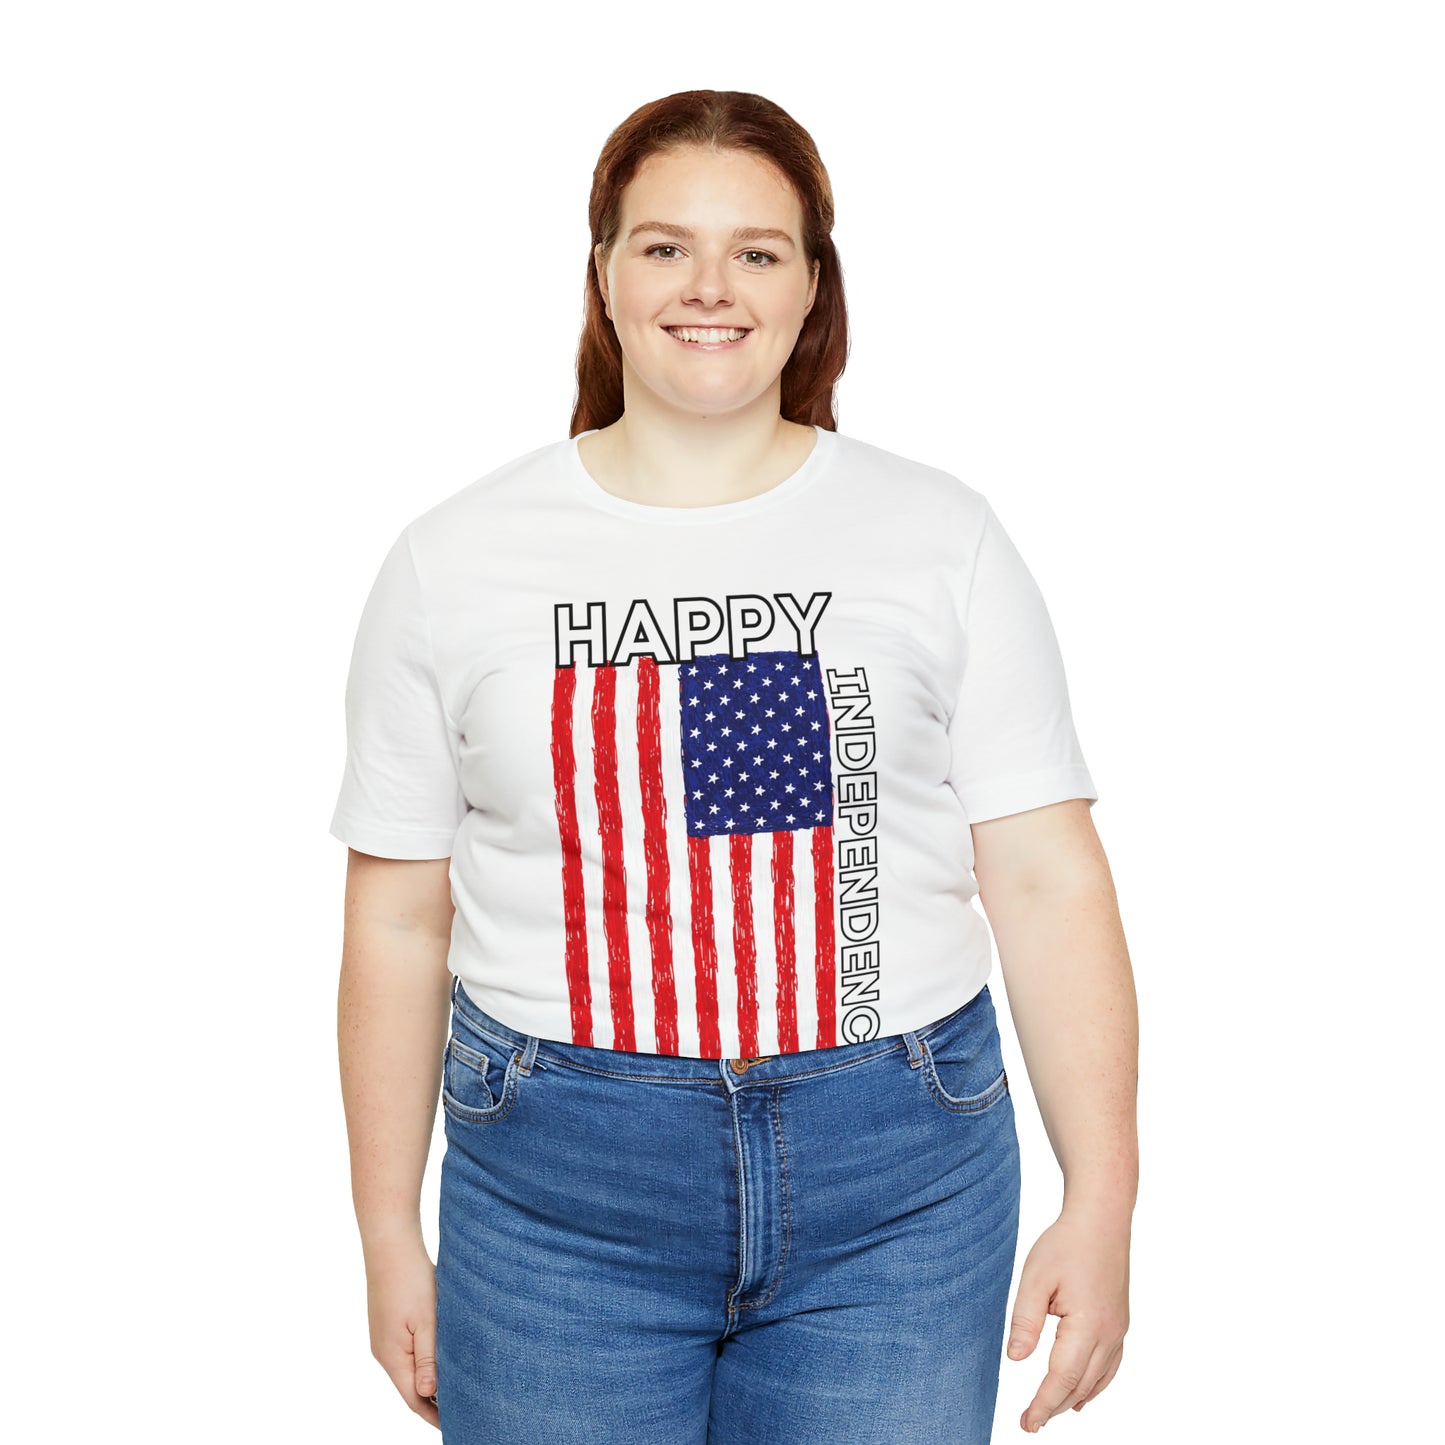 Show Your Patriotism with USA Flag Shirts: Independence Day, Fireworks, Freedom - Perfect for Women and Men on 4th of July